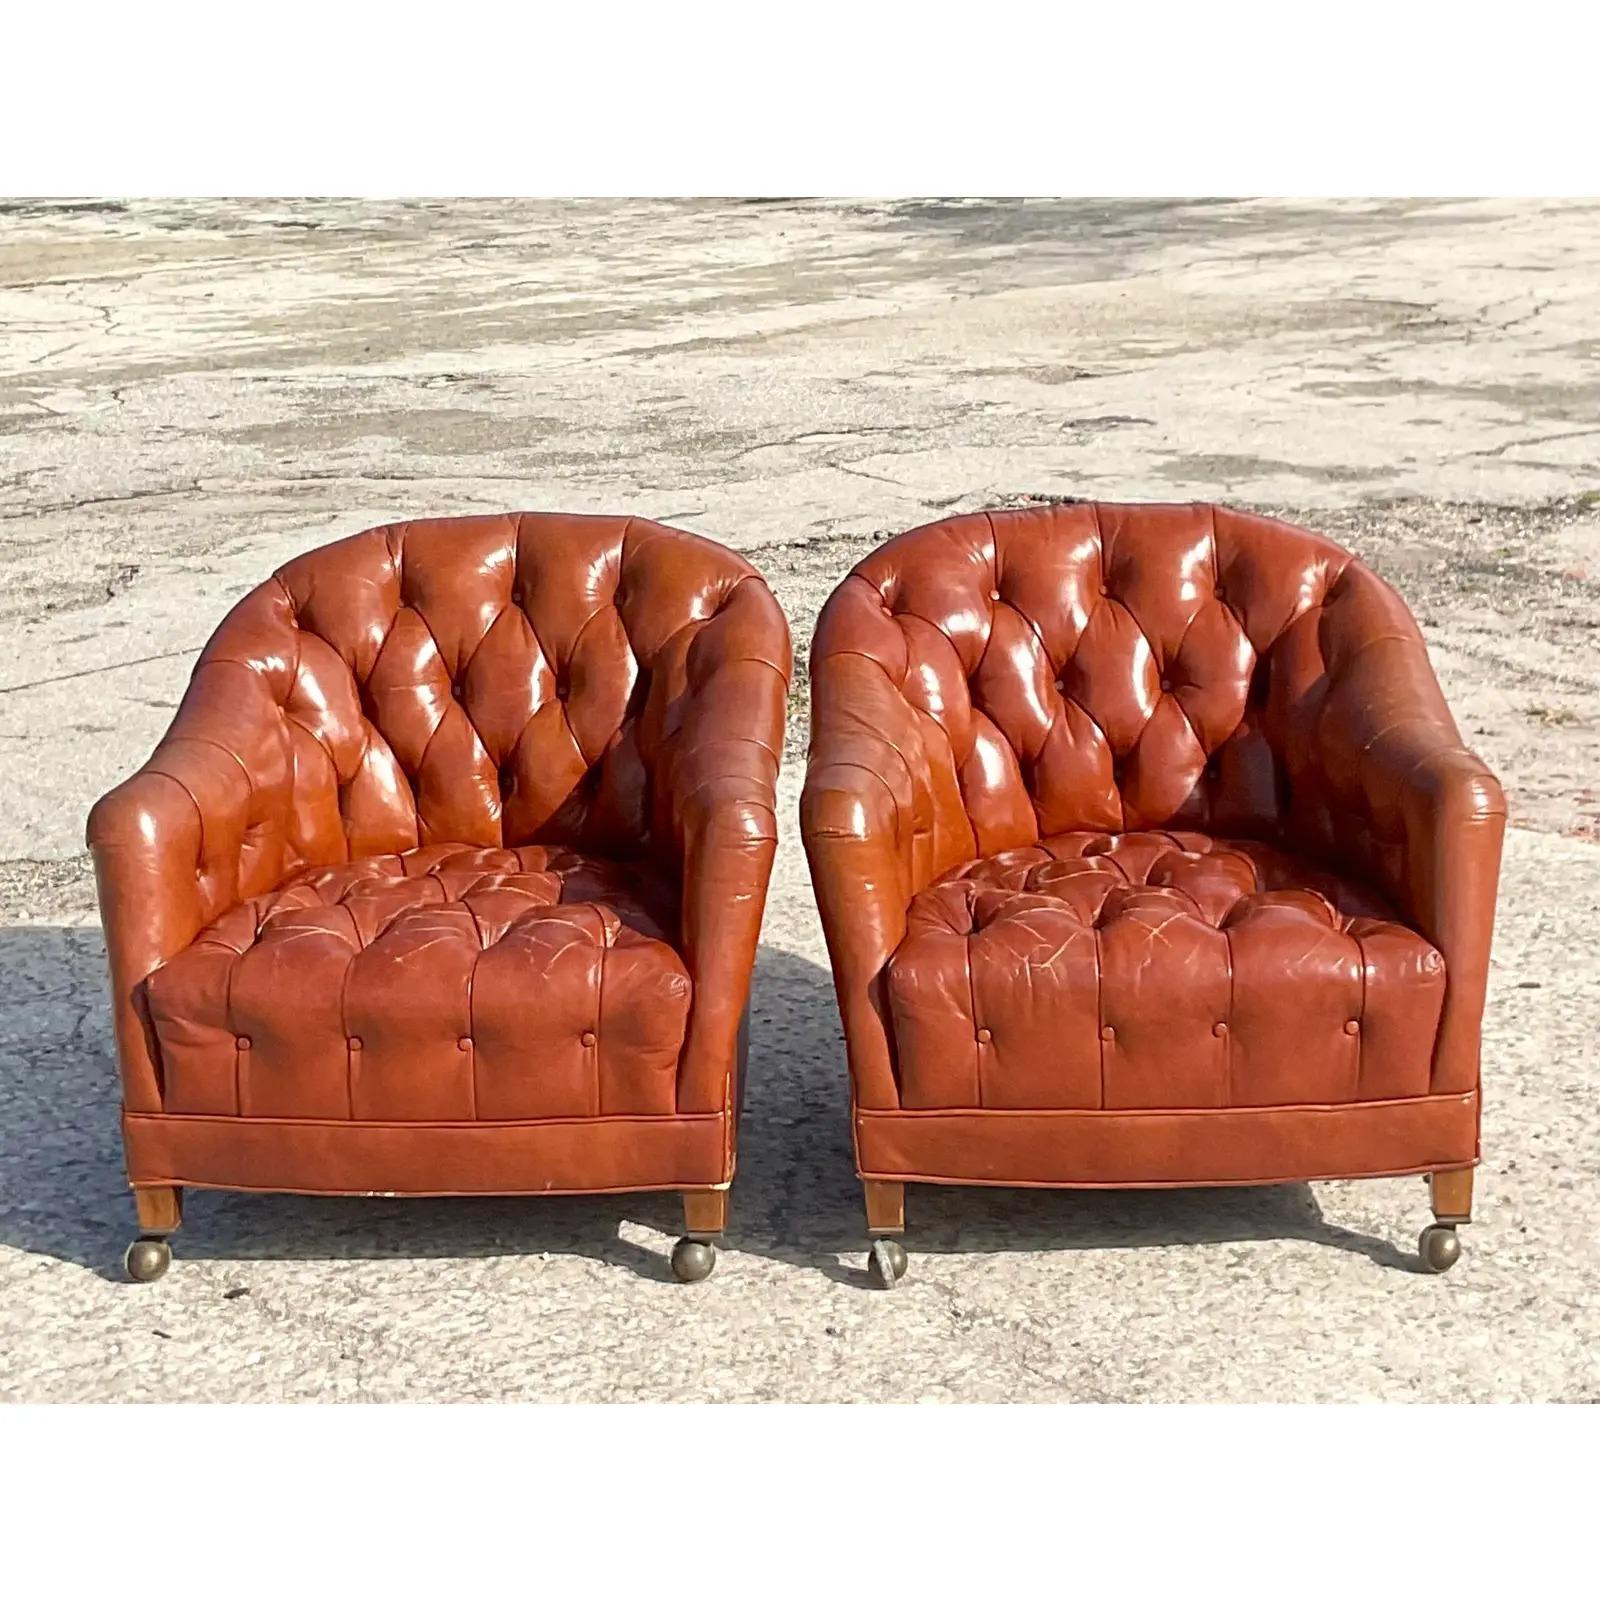 20th Century Vintage Regency Hickory Chair Tufted Leather Tub Chair on Casters, a Pair